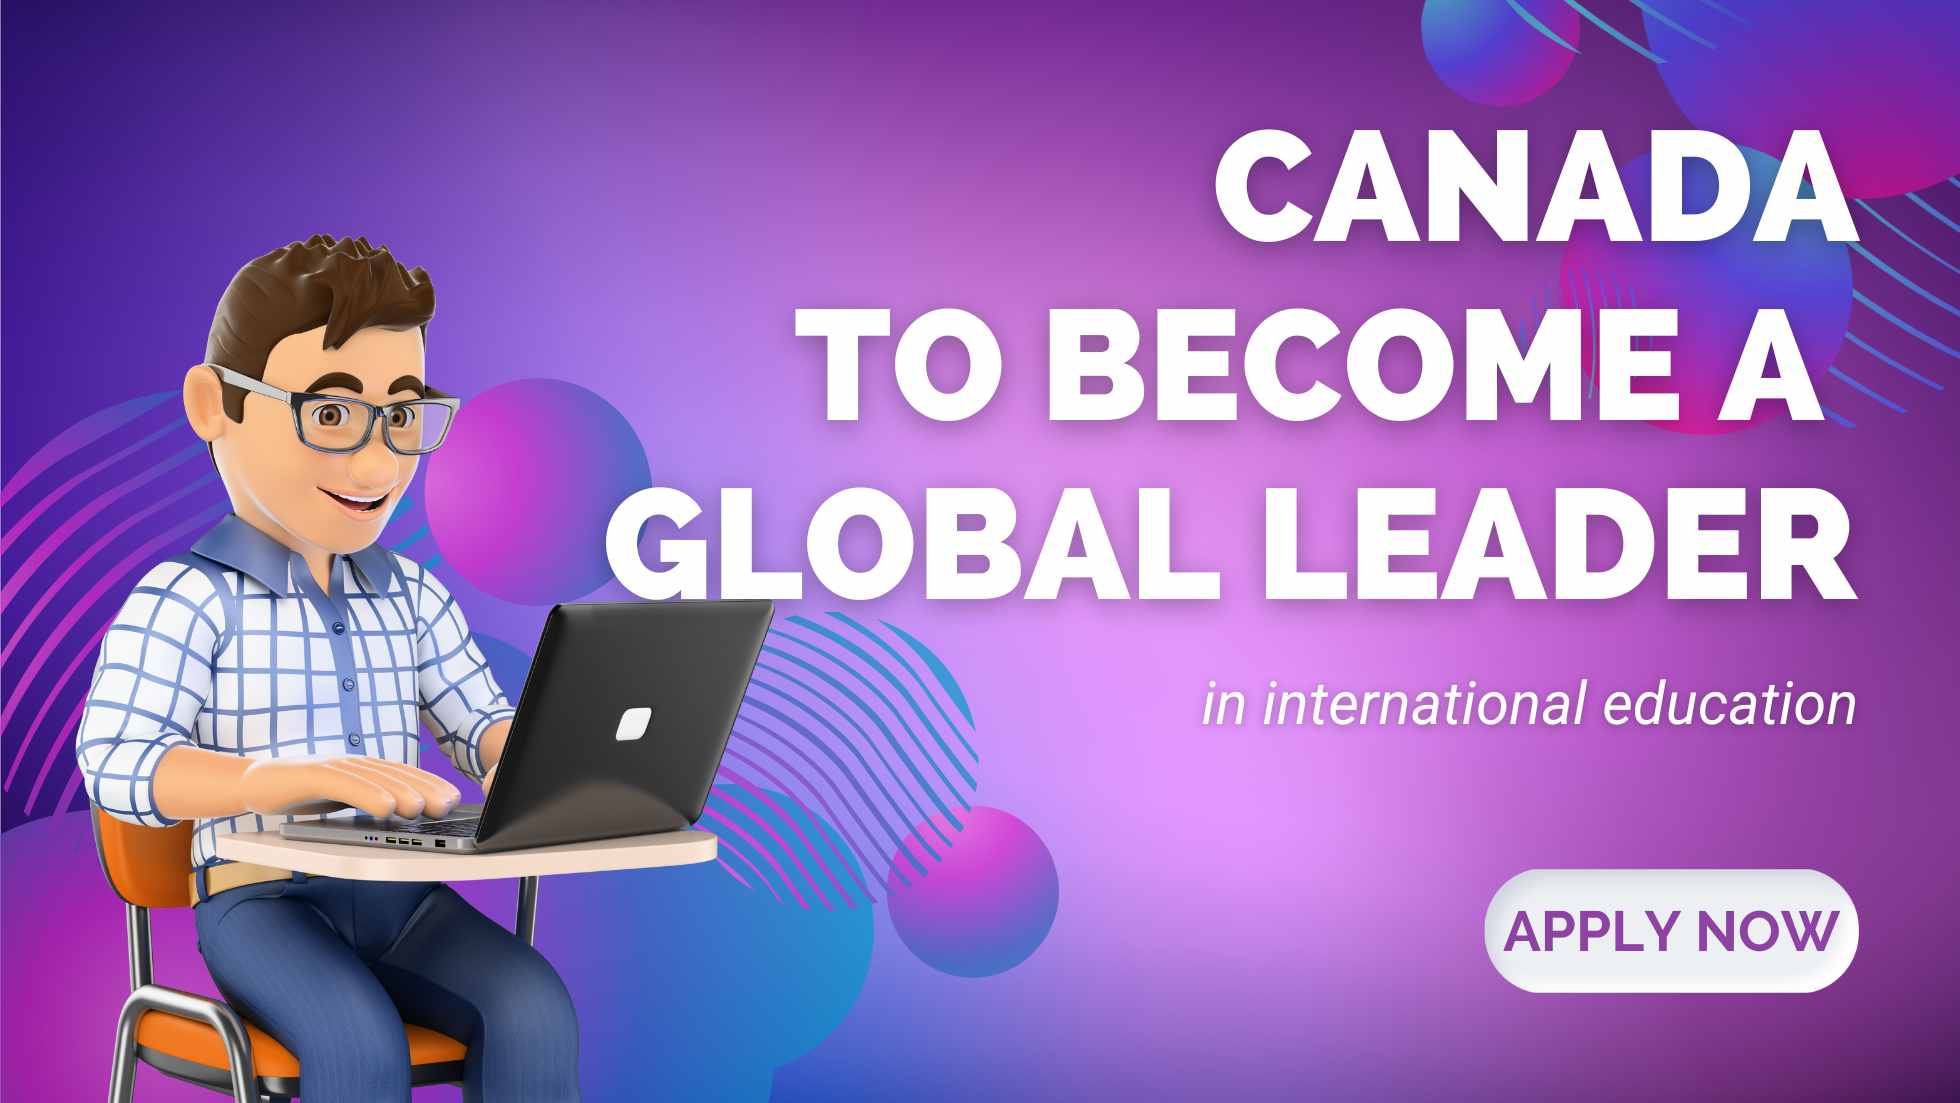 Canada to become a global leader in international education